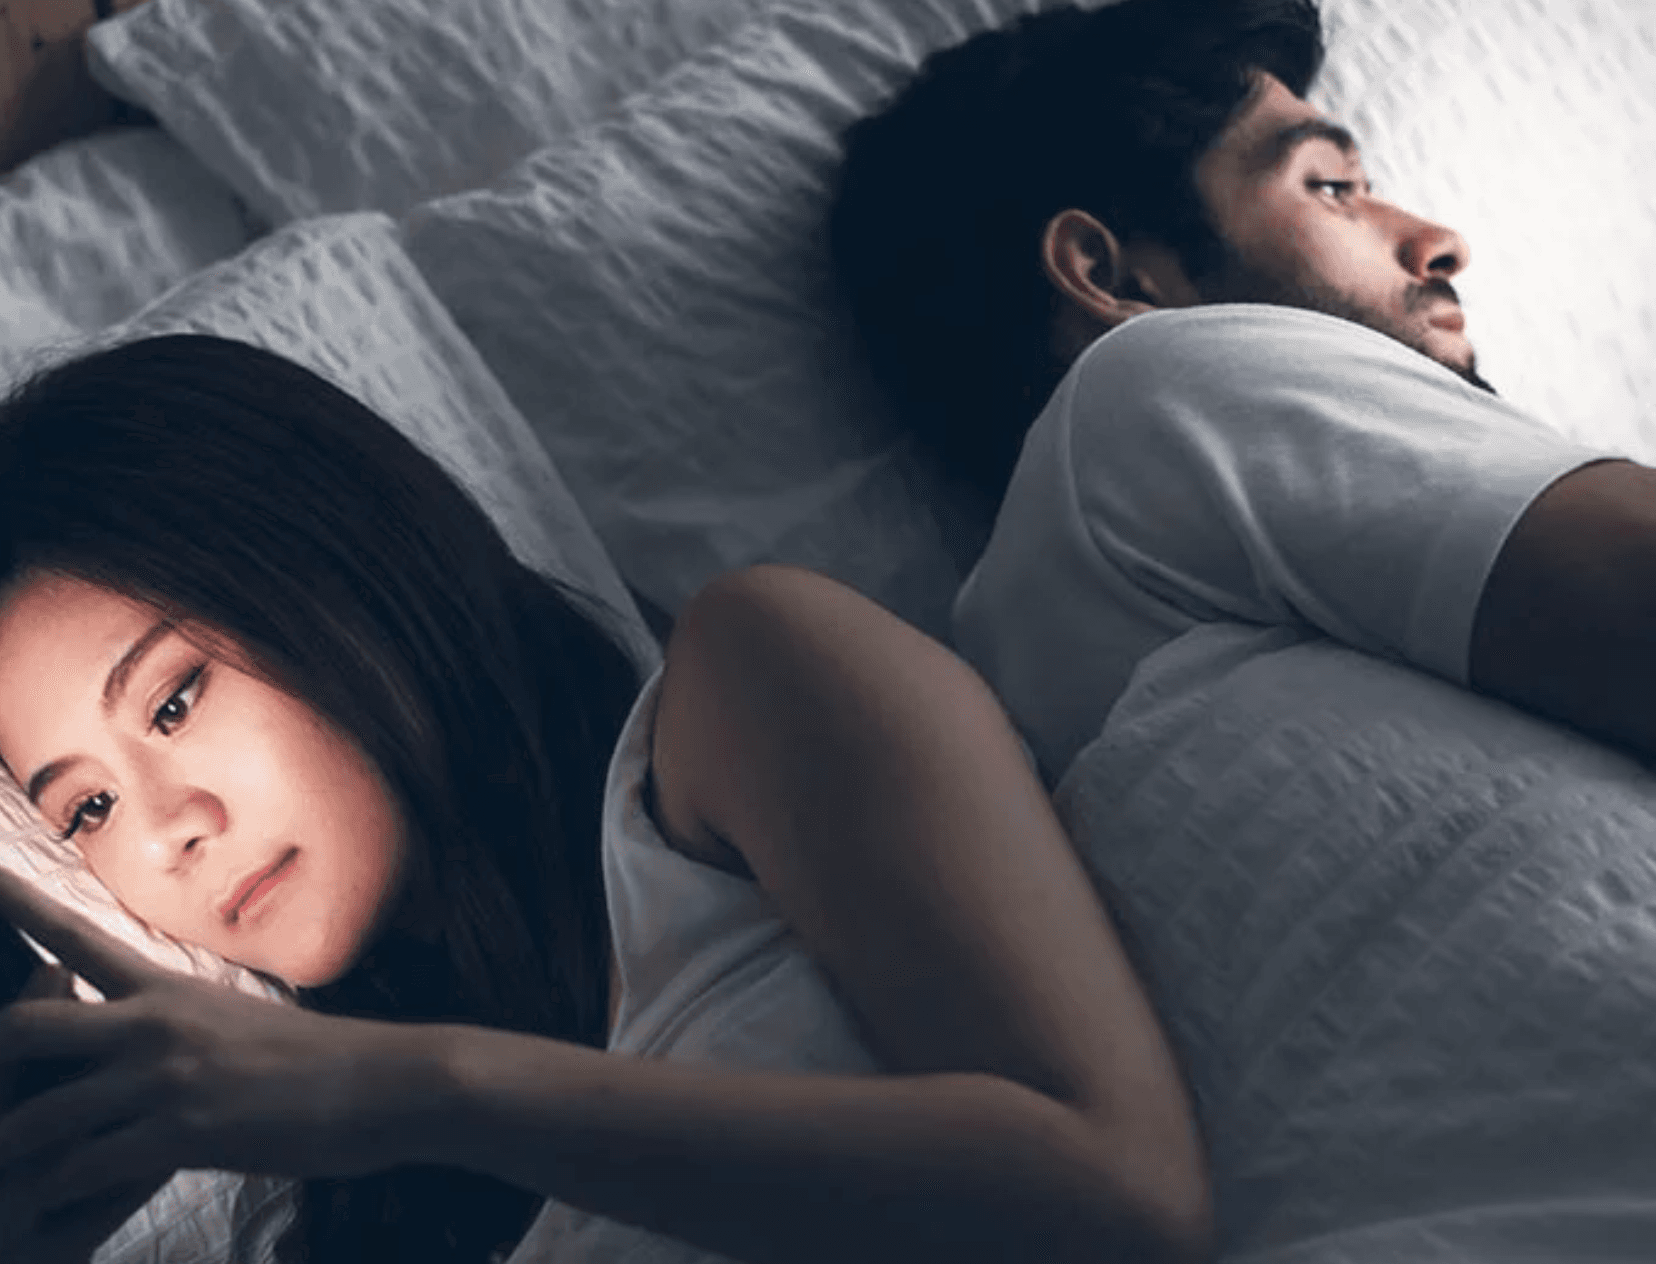 10 Women Reveal How They Find Out That Their Partner Was Cheating On Them